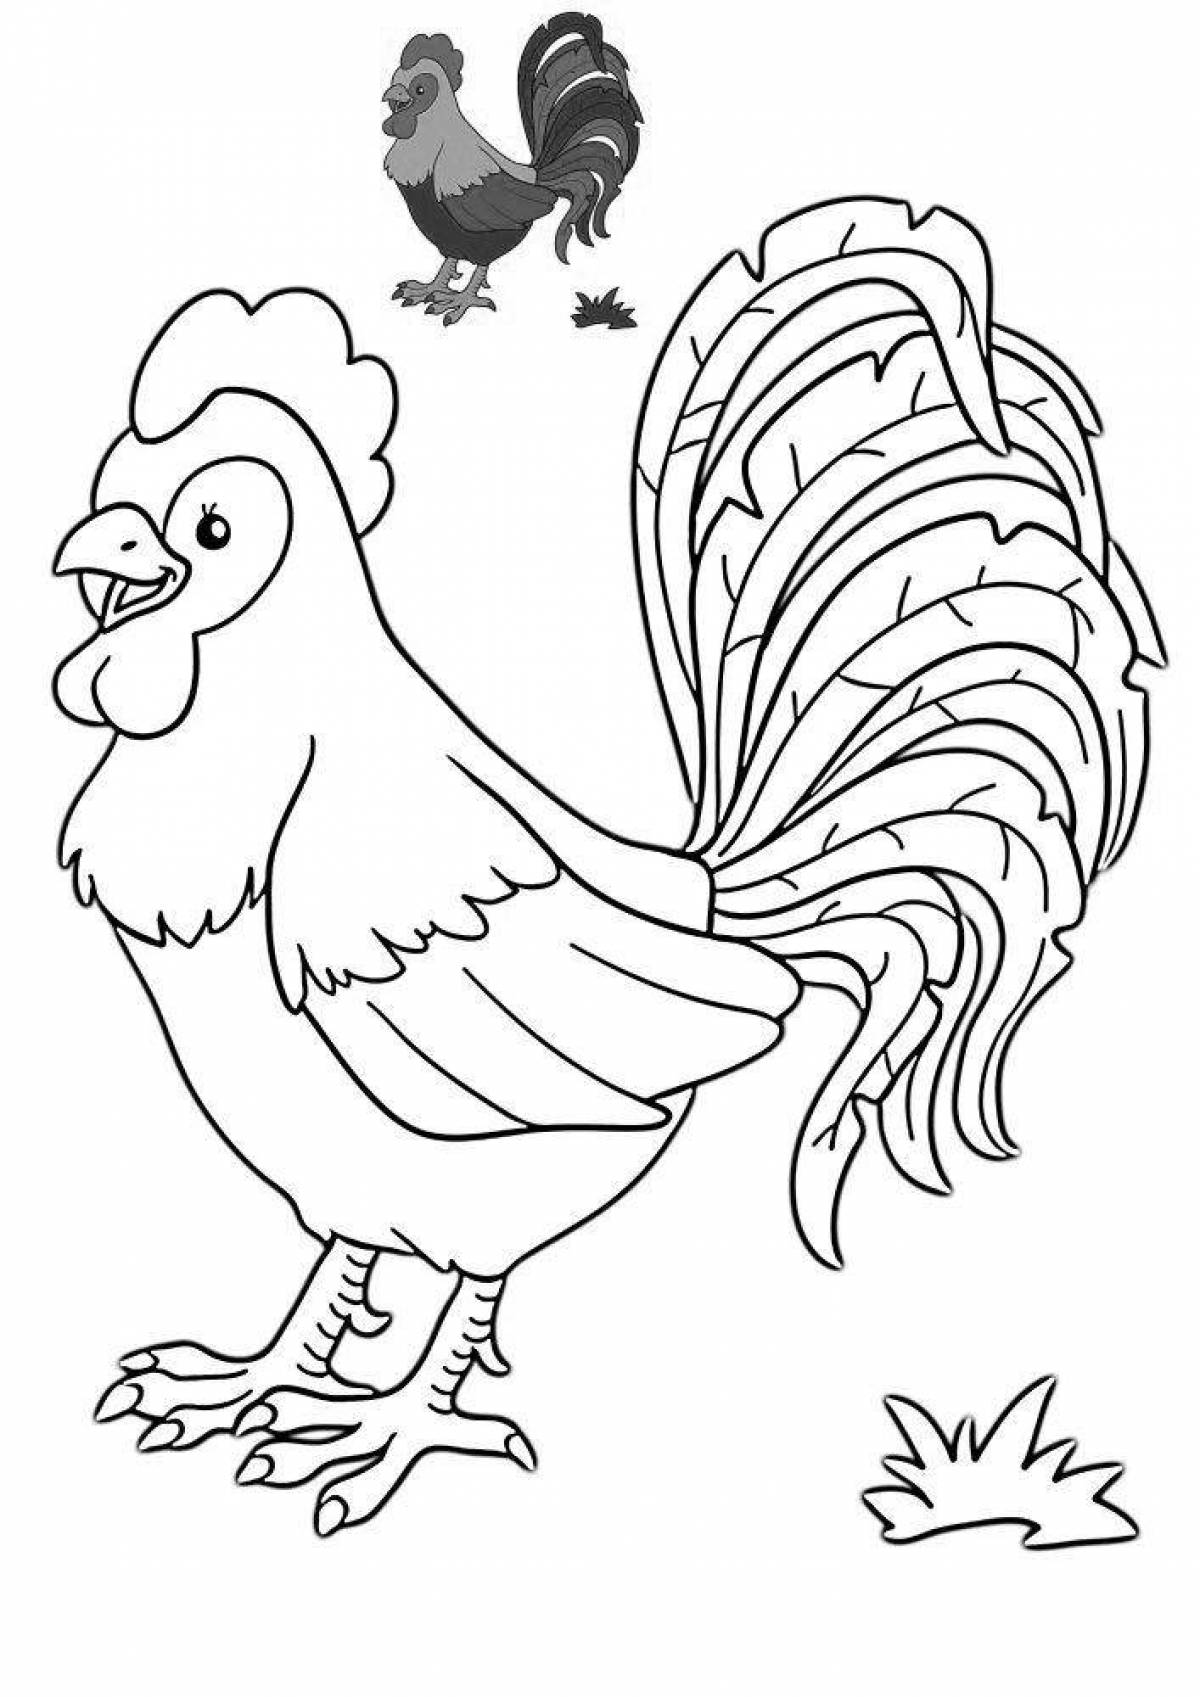 Coloring book shiny rooster